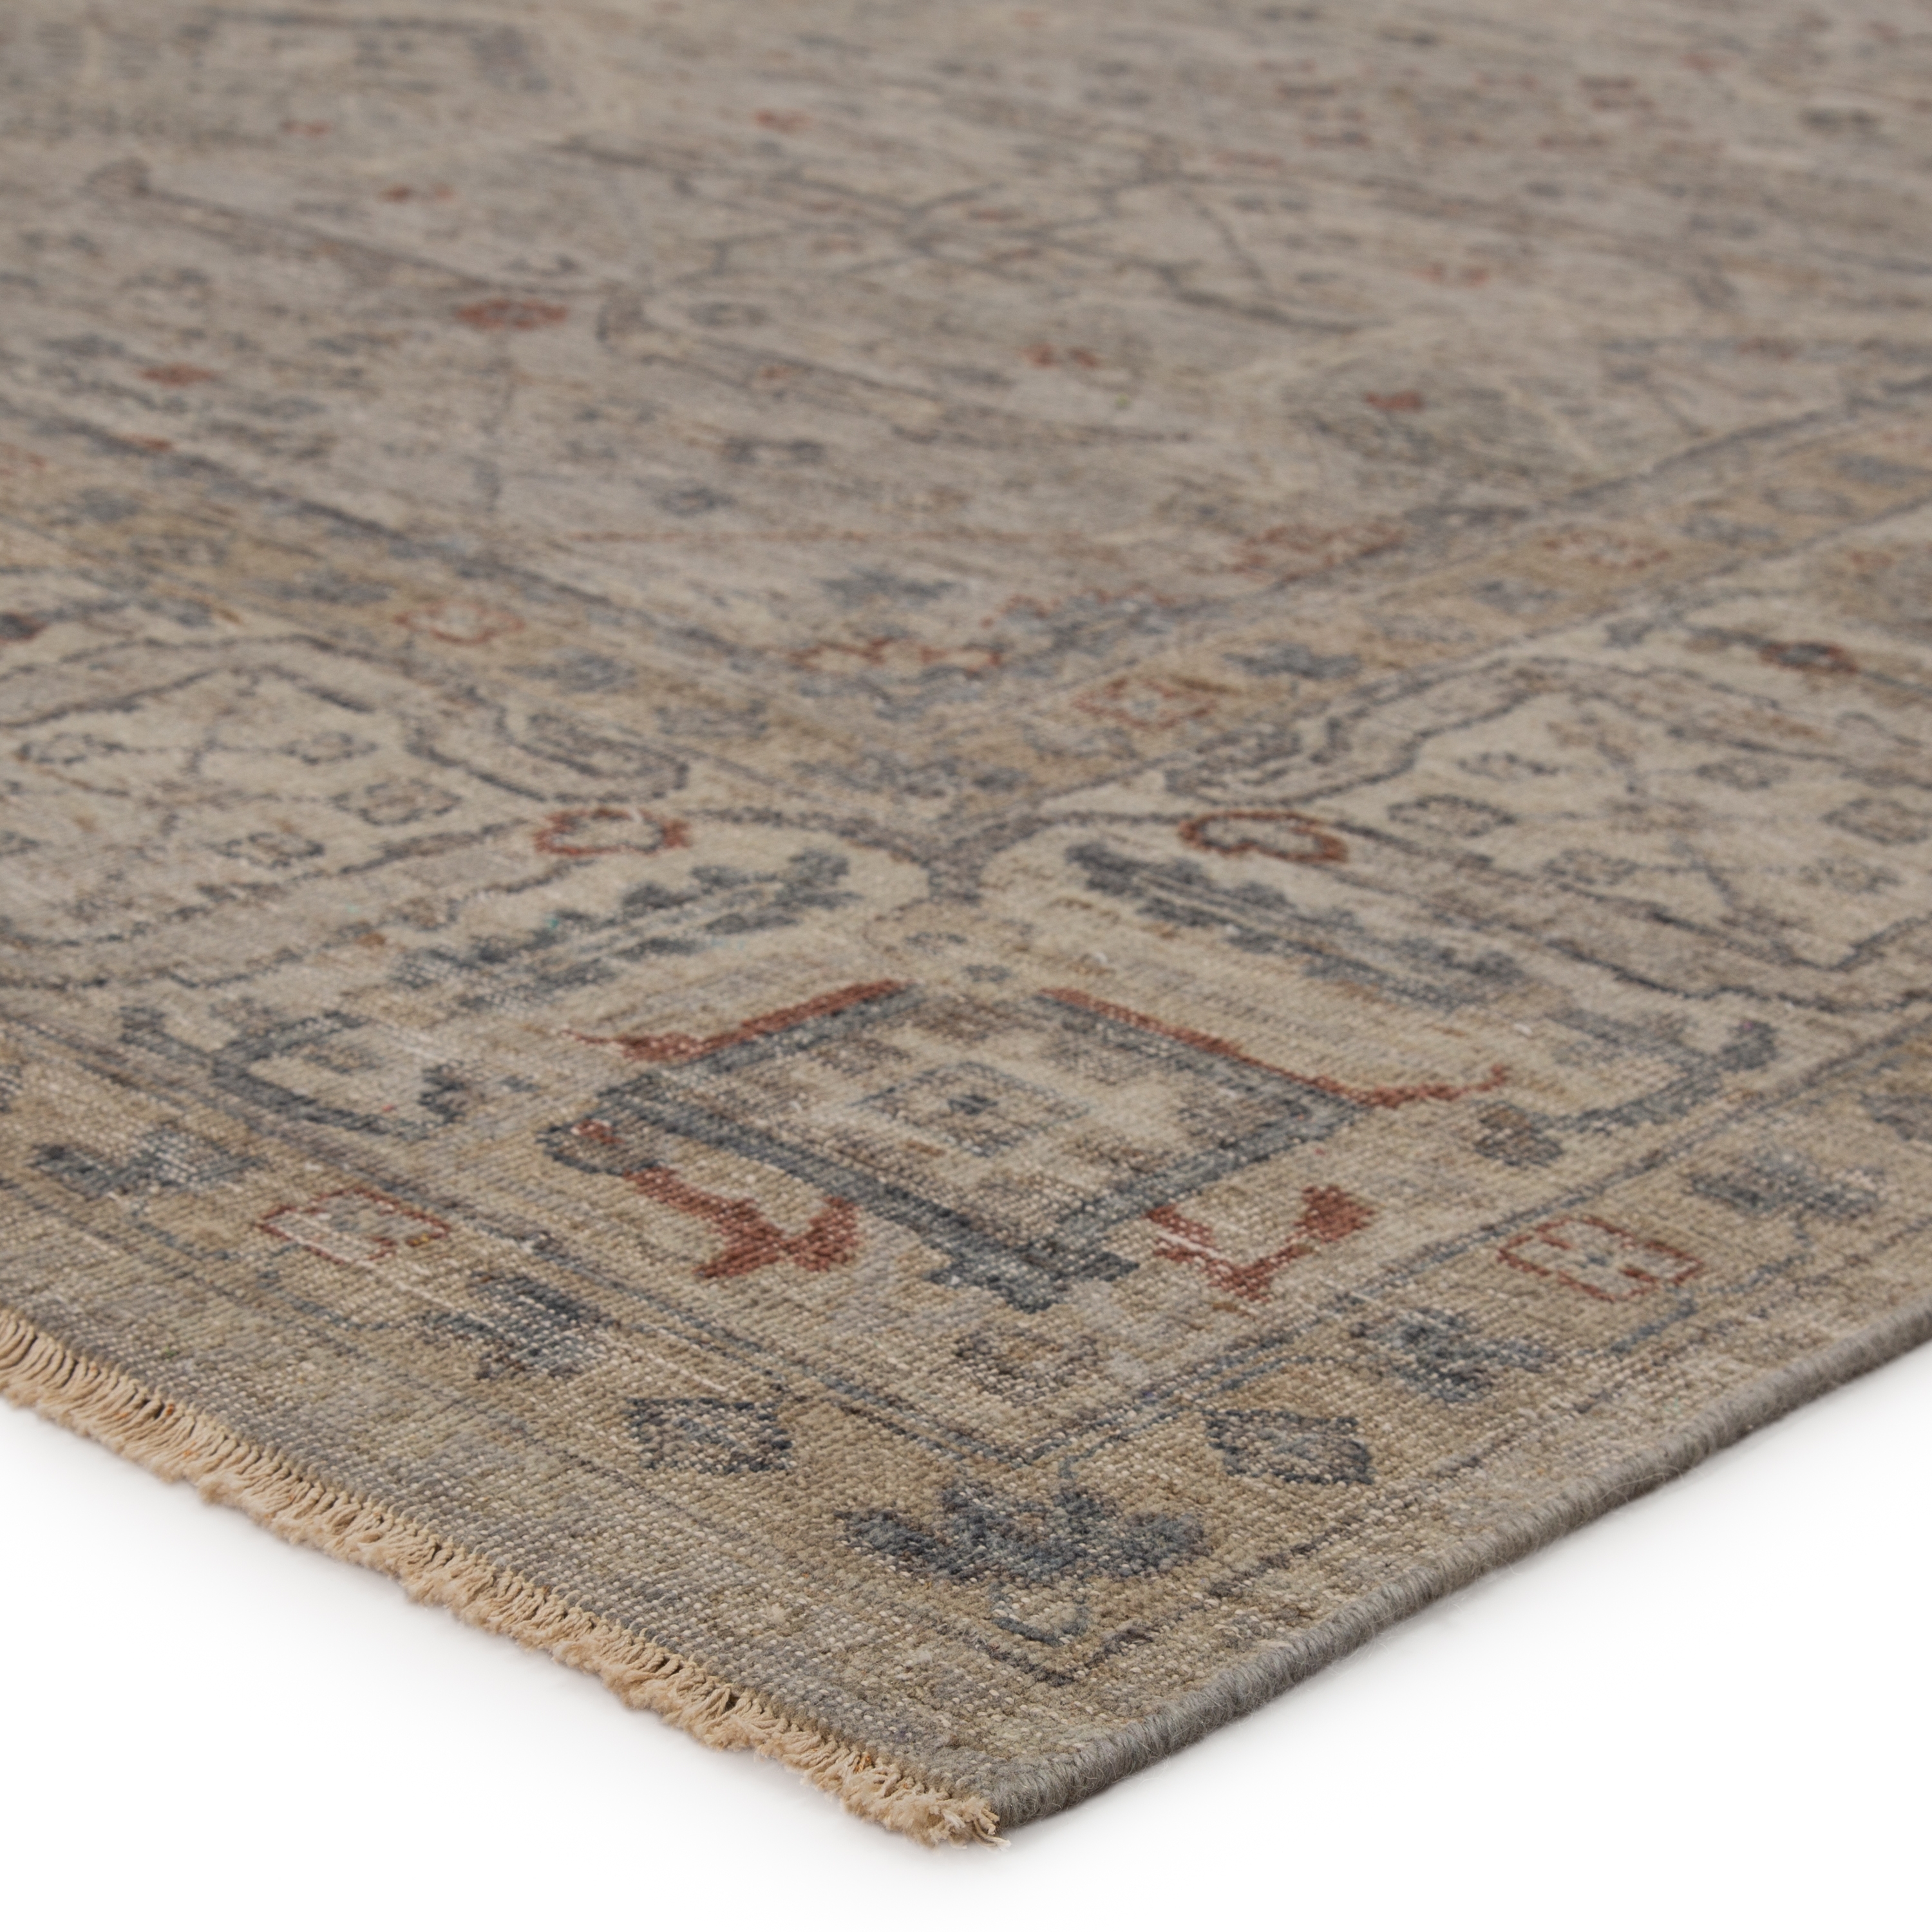 Maison Hand-Knotted Oriental Beige/ Gray Area Rug (8'X10') - Image 1